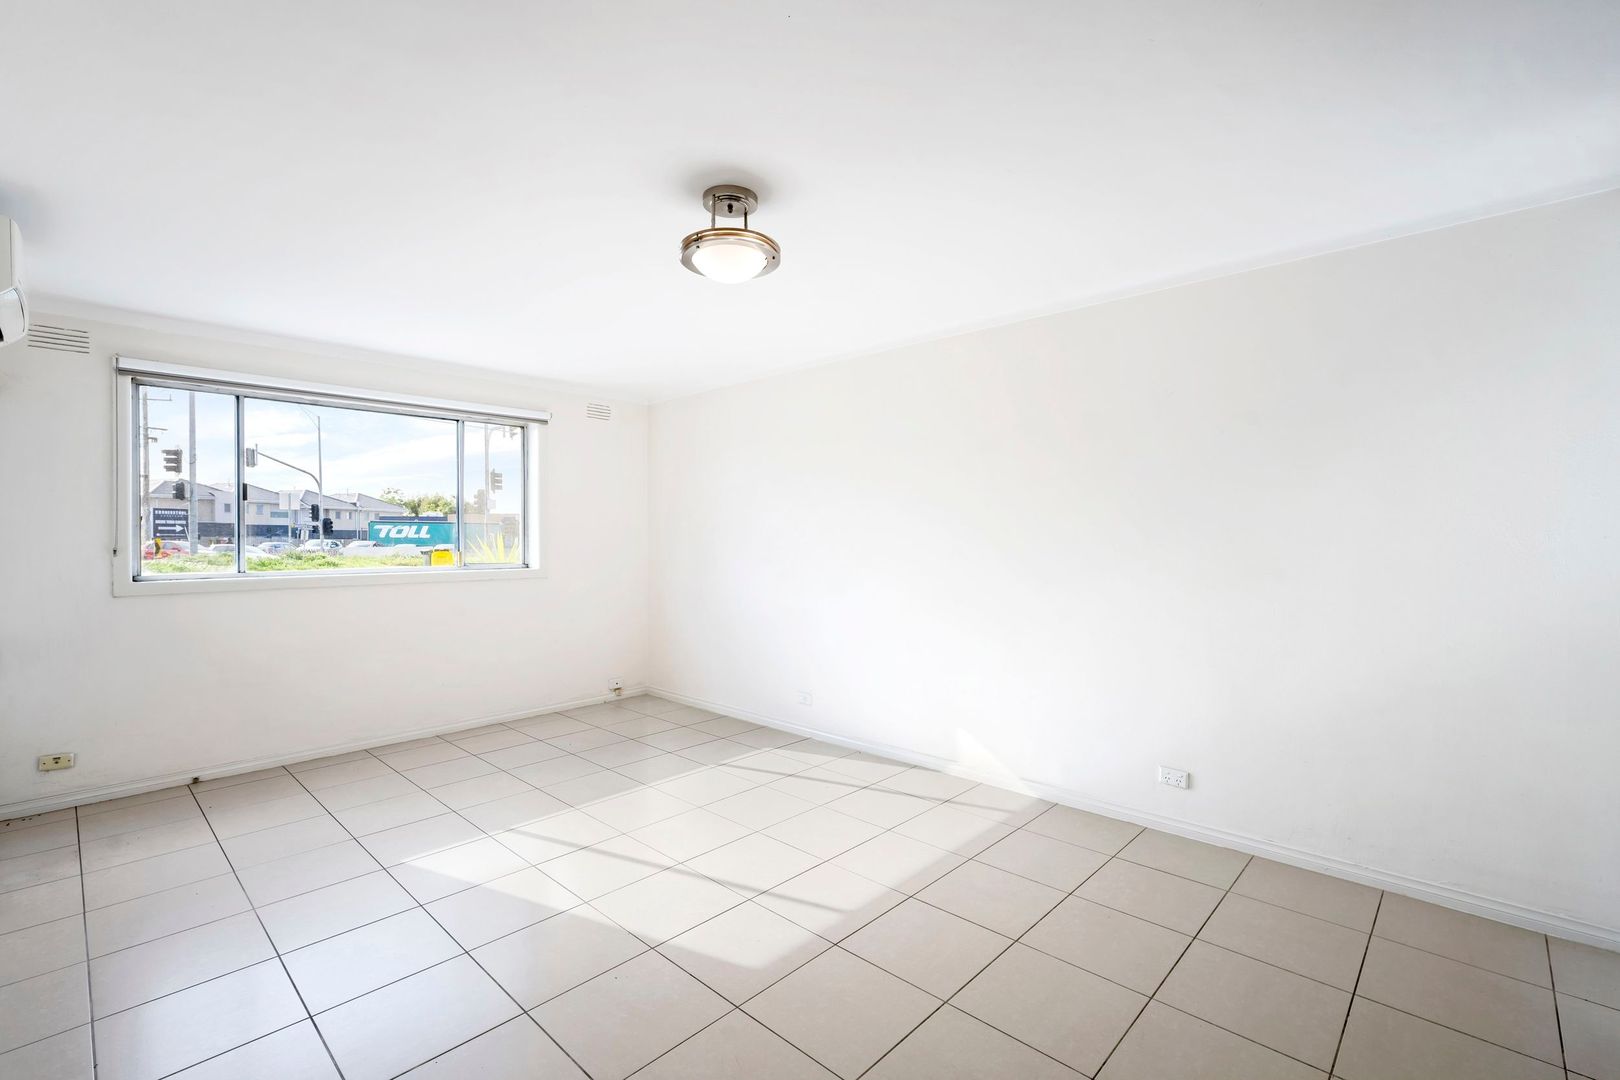 2/77 Canning Street, Avondale Heights VIC 3034, Image 2